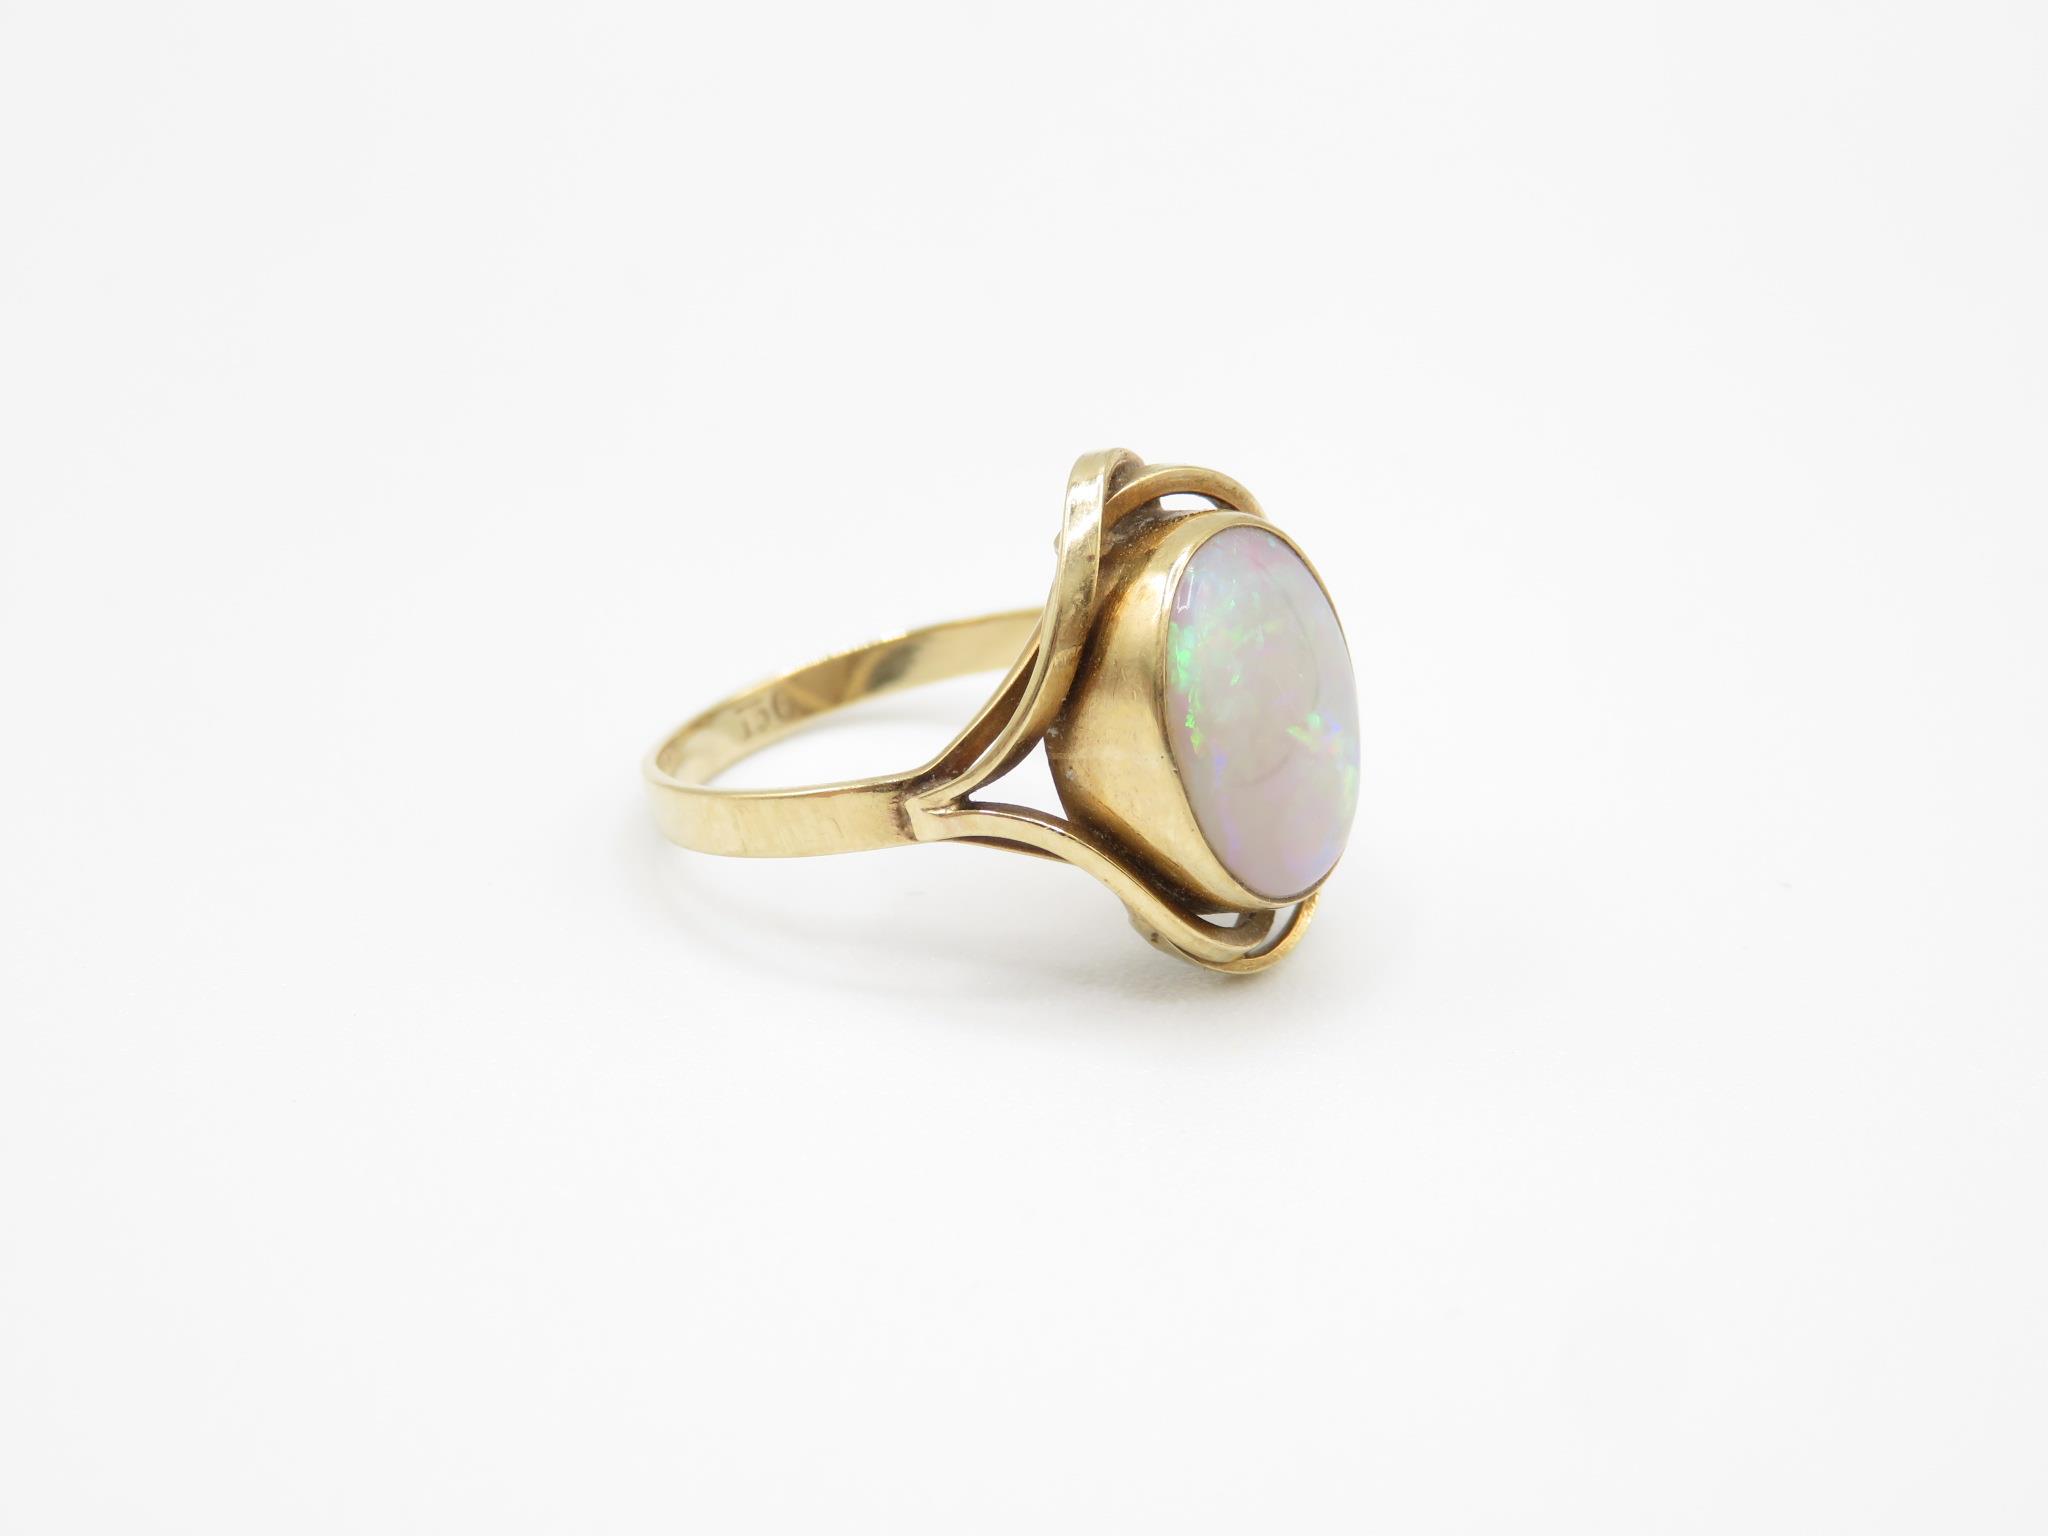 9ct Gold White Opal Single Stone Dress Ring (2.8g) Size N.5 - Image 4 of 5